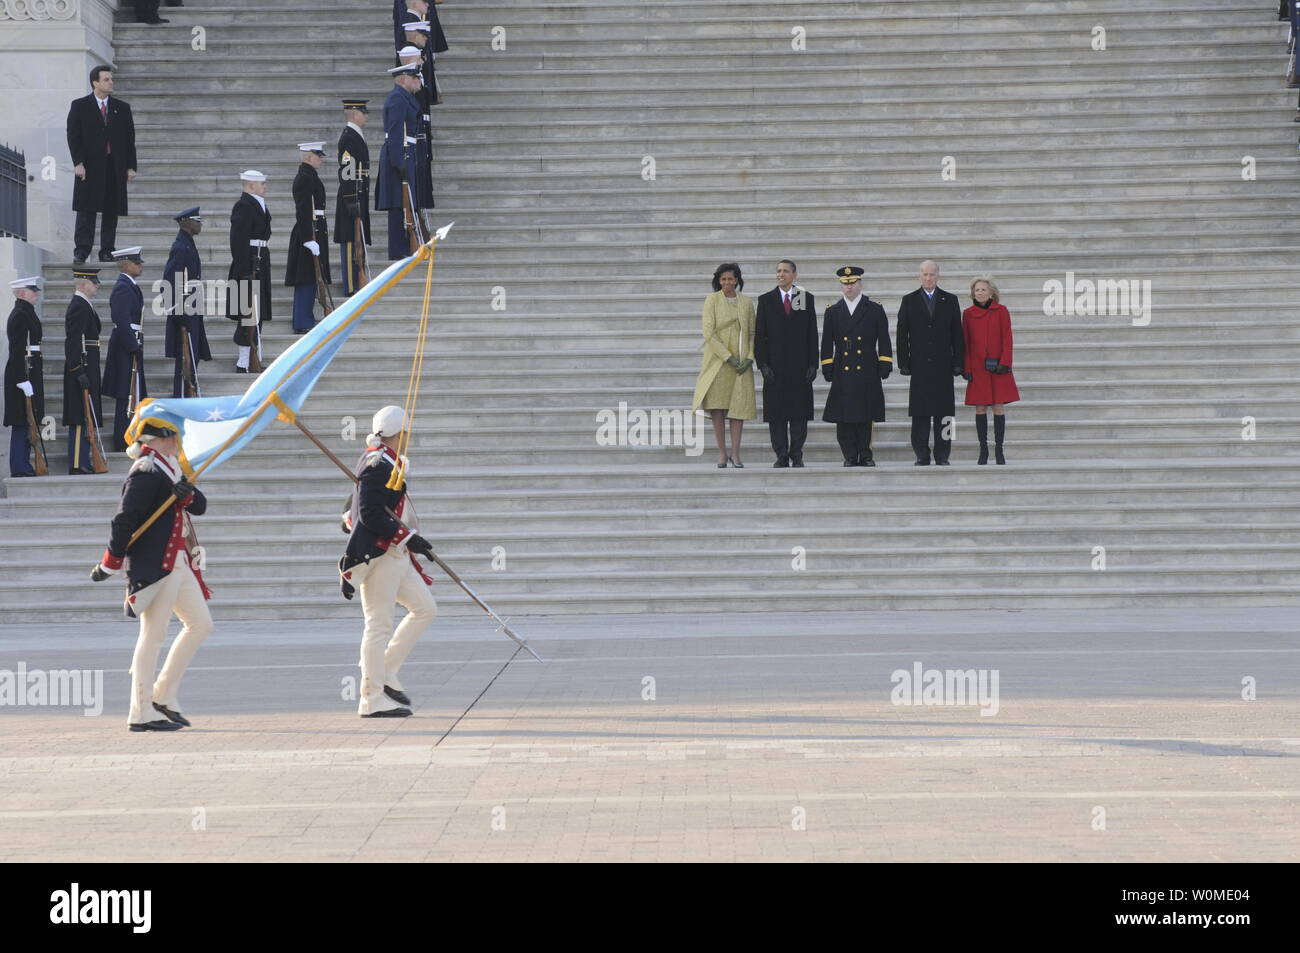 The Commander in Chief's Guard, 3rd U.S. Infantry (The Old Guard) renders honors, as they pass in review for (L to R) First Lady Michelle Obama, U.S. President Barack Obama, Maj. Gen. Richard J. Rowe Jr., Vice President Joe Biden and Jill Biden prior to the Inaugural Parade after Obama's swearing-in ceremony in Washington January 20, 2009. The review and escort to the White House following the 56th Presidential Inauguration harks back to the escort provided George Washington on his 1789 inauguration.  (UPI Photo/Kyle Niemi/U.S. Coast Guard) Stock Photo